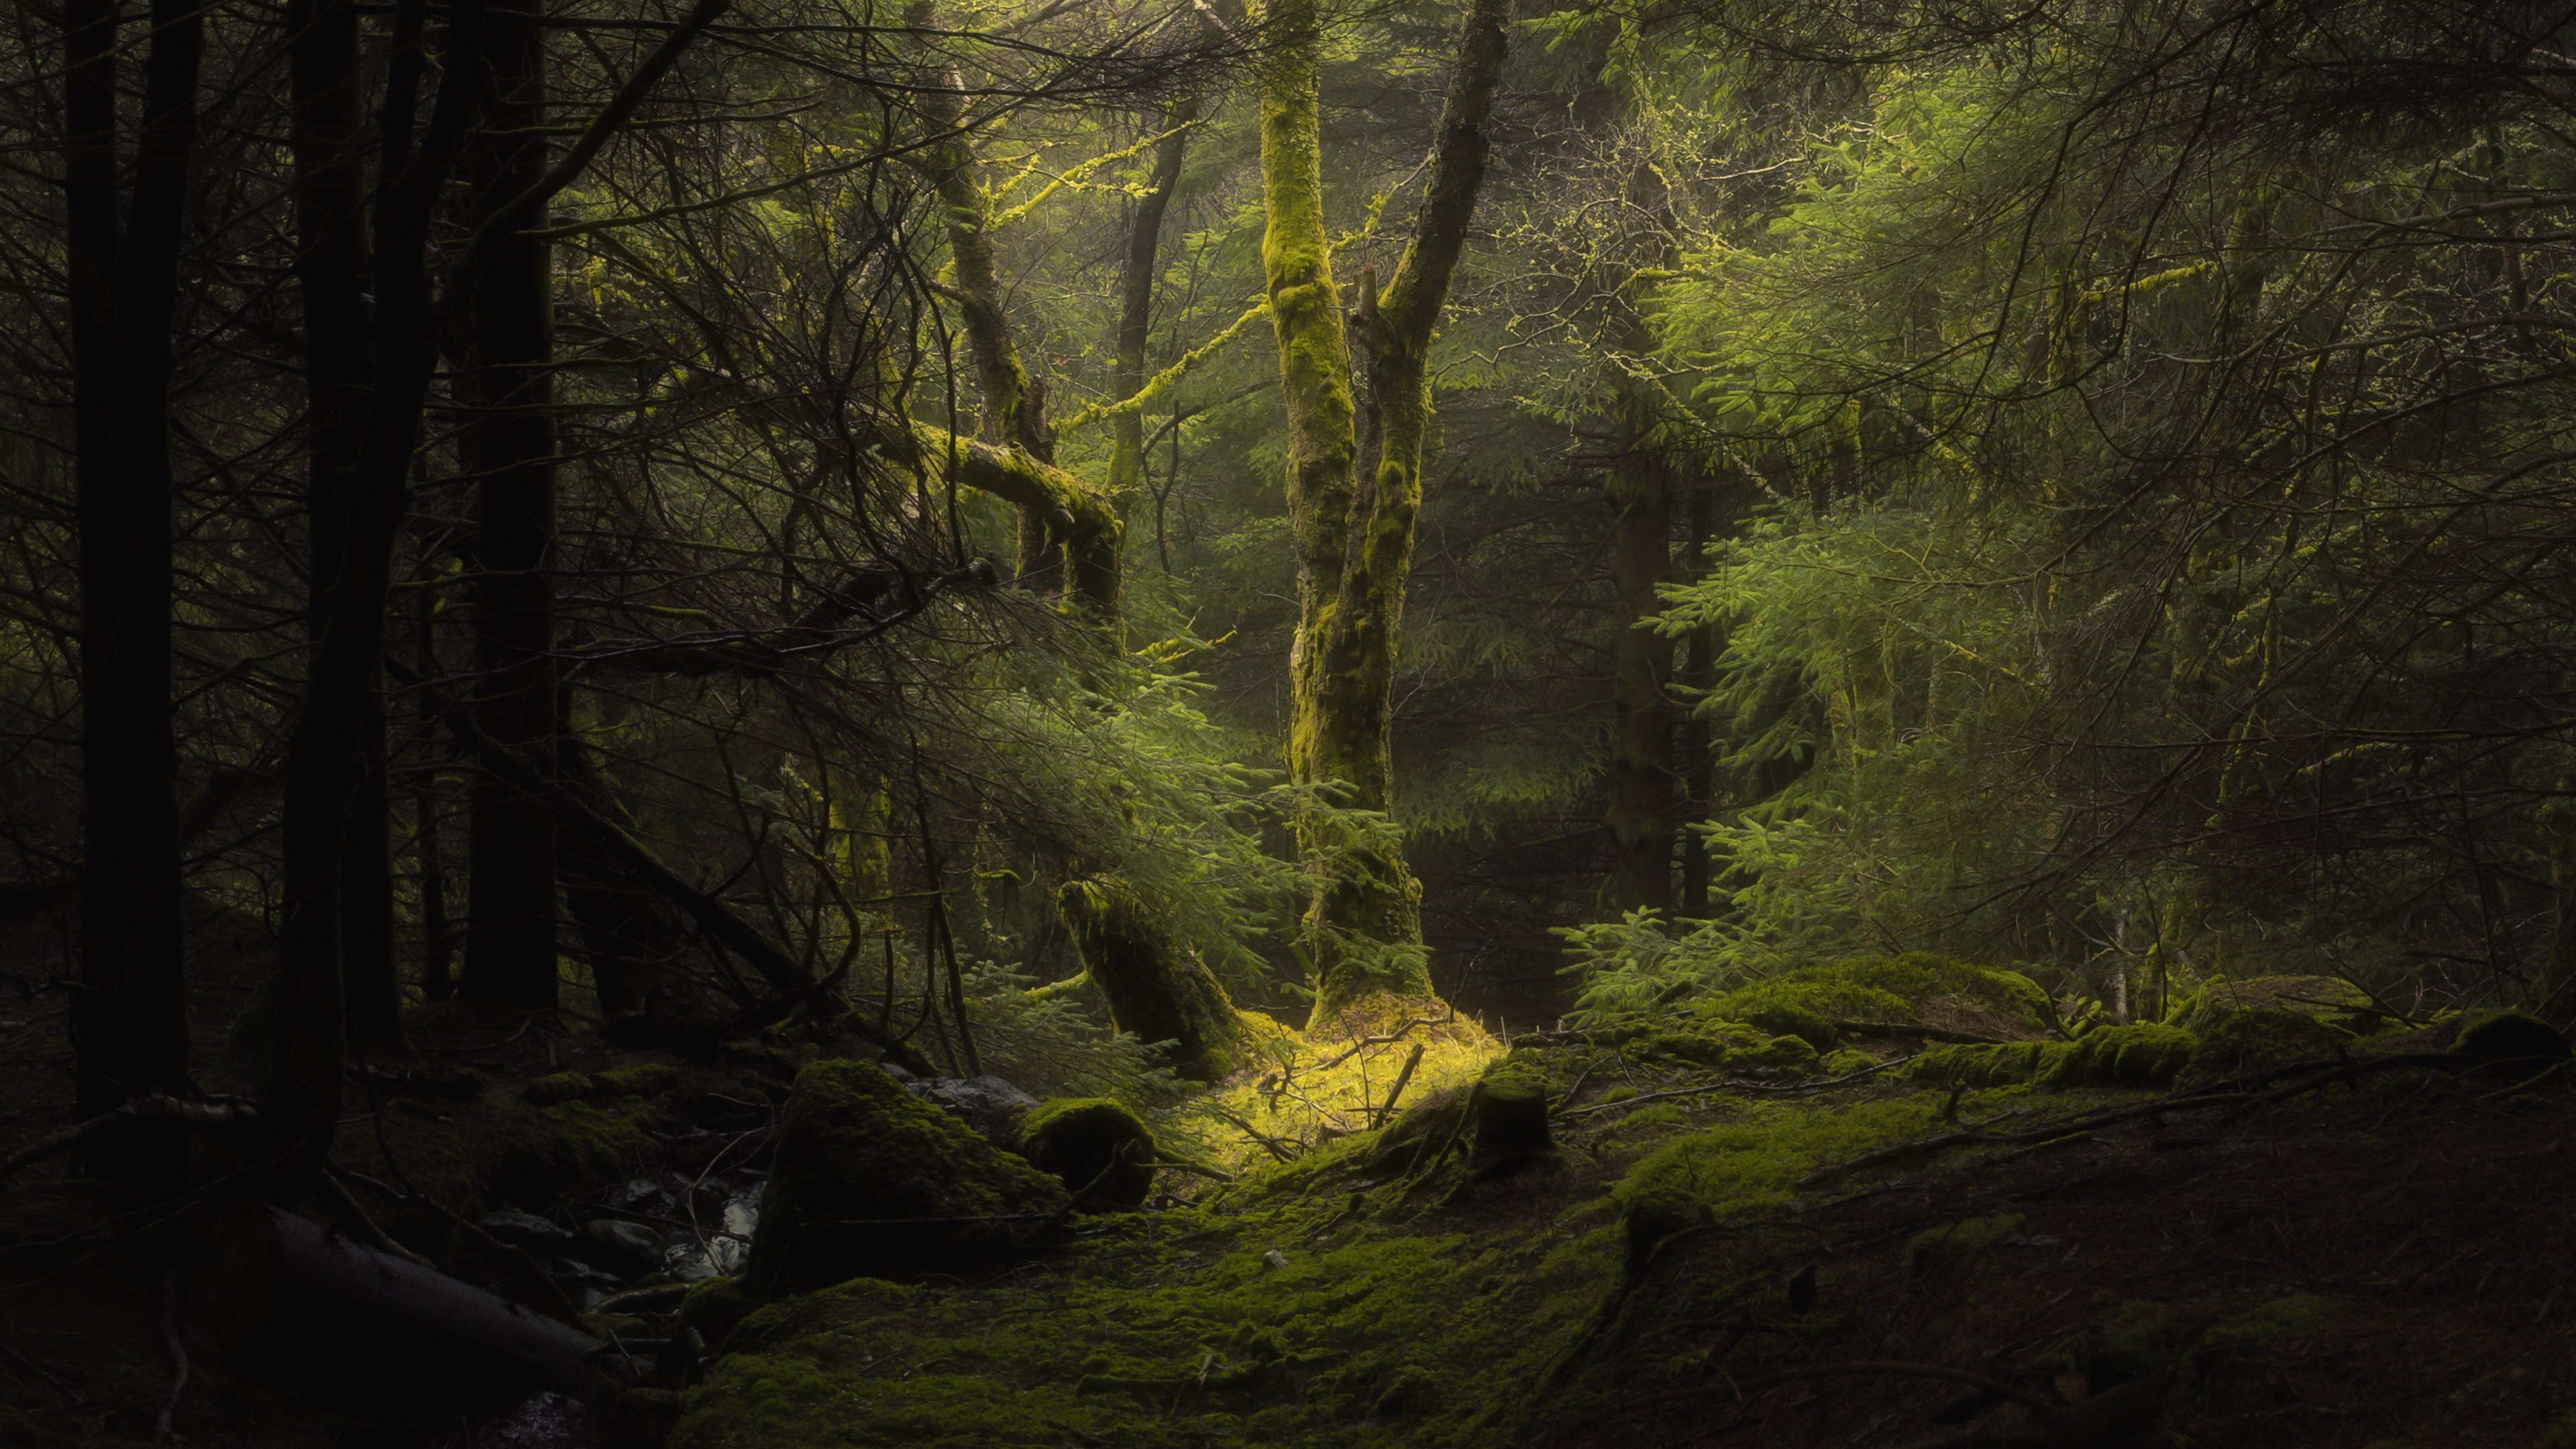 4k forest wallpaper,nature,natural landscape,forest,natural environment,old growth forest